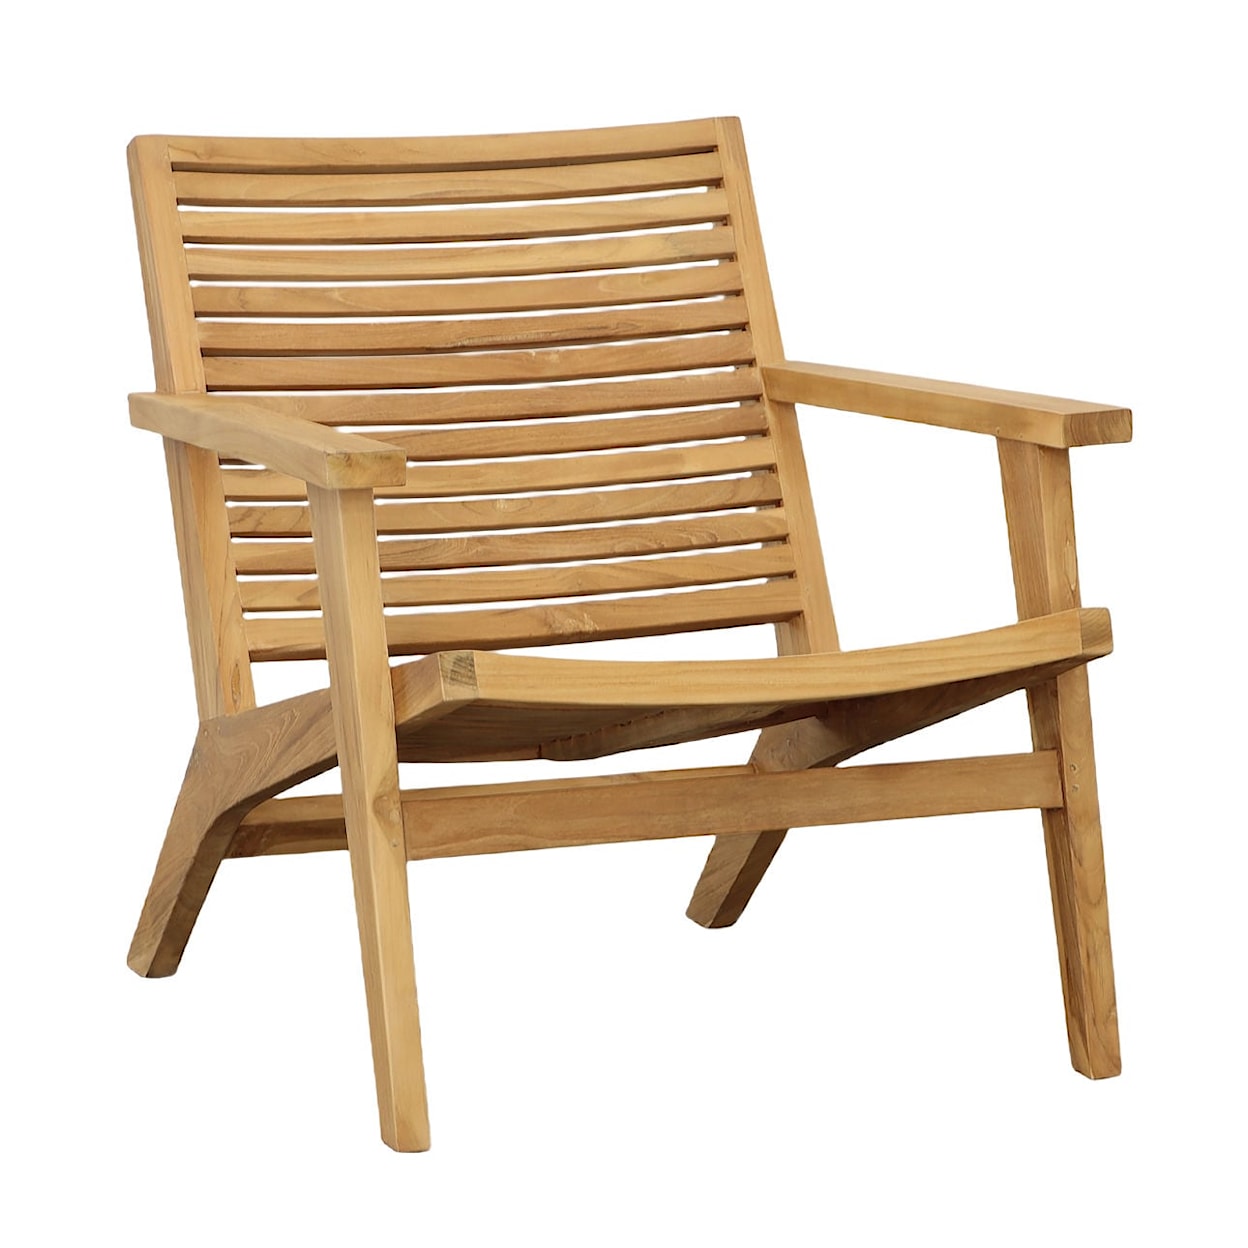 Dovetail Furniture Janine Outdoor Chair